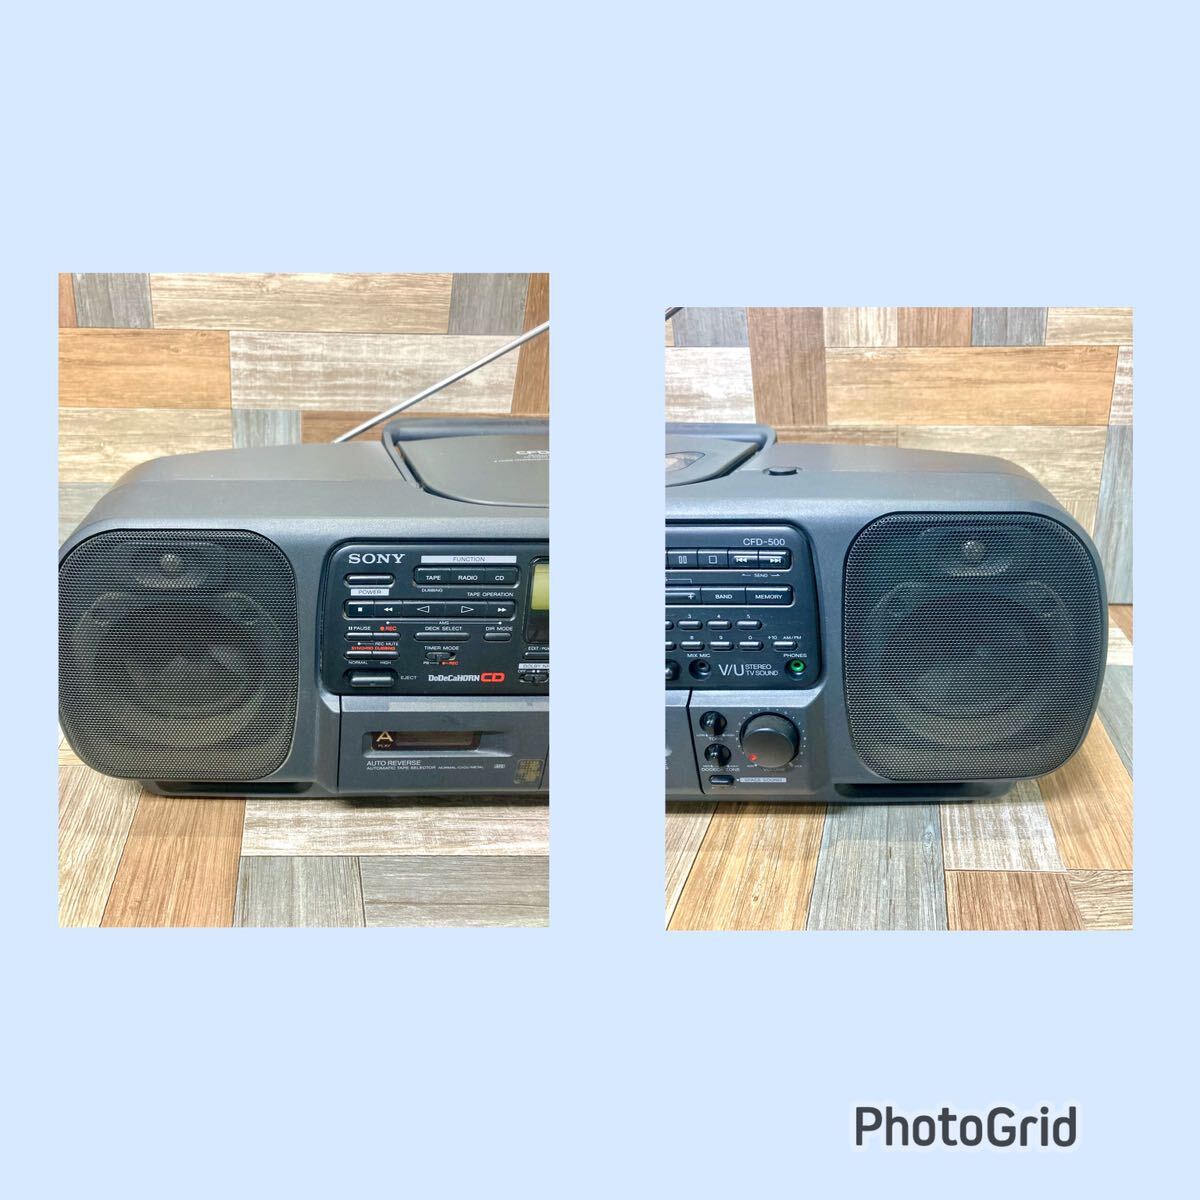 * SONY CFD-500 CD radio-cassette double cassette doteka horn DODECAHORN present condition goods Showa Retro 